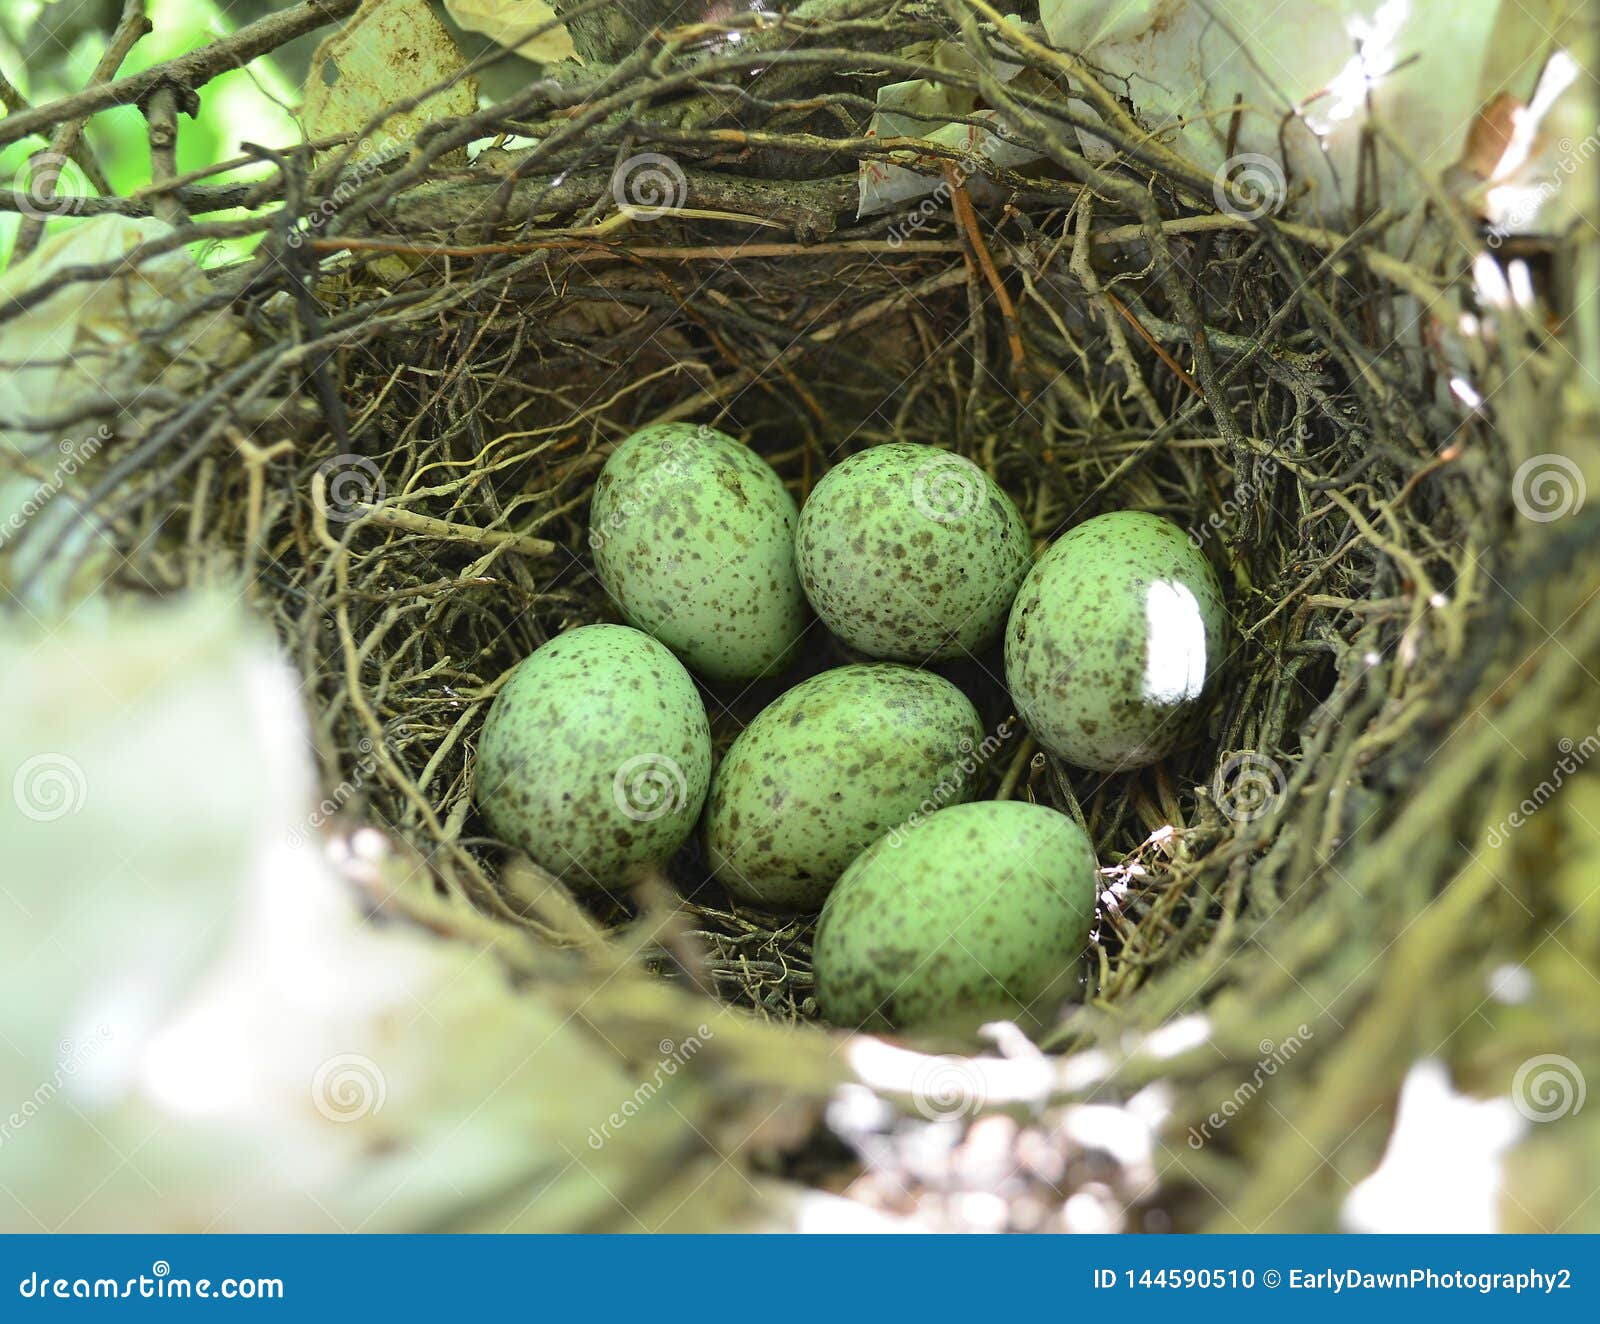 Bluejay Eggs In Nest Stock Photo Image Of Green Pear